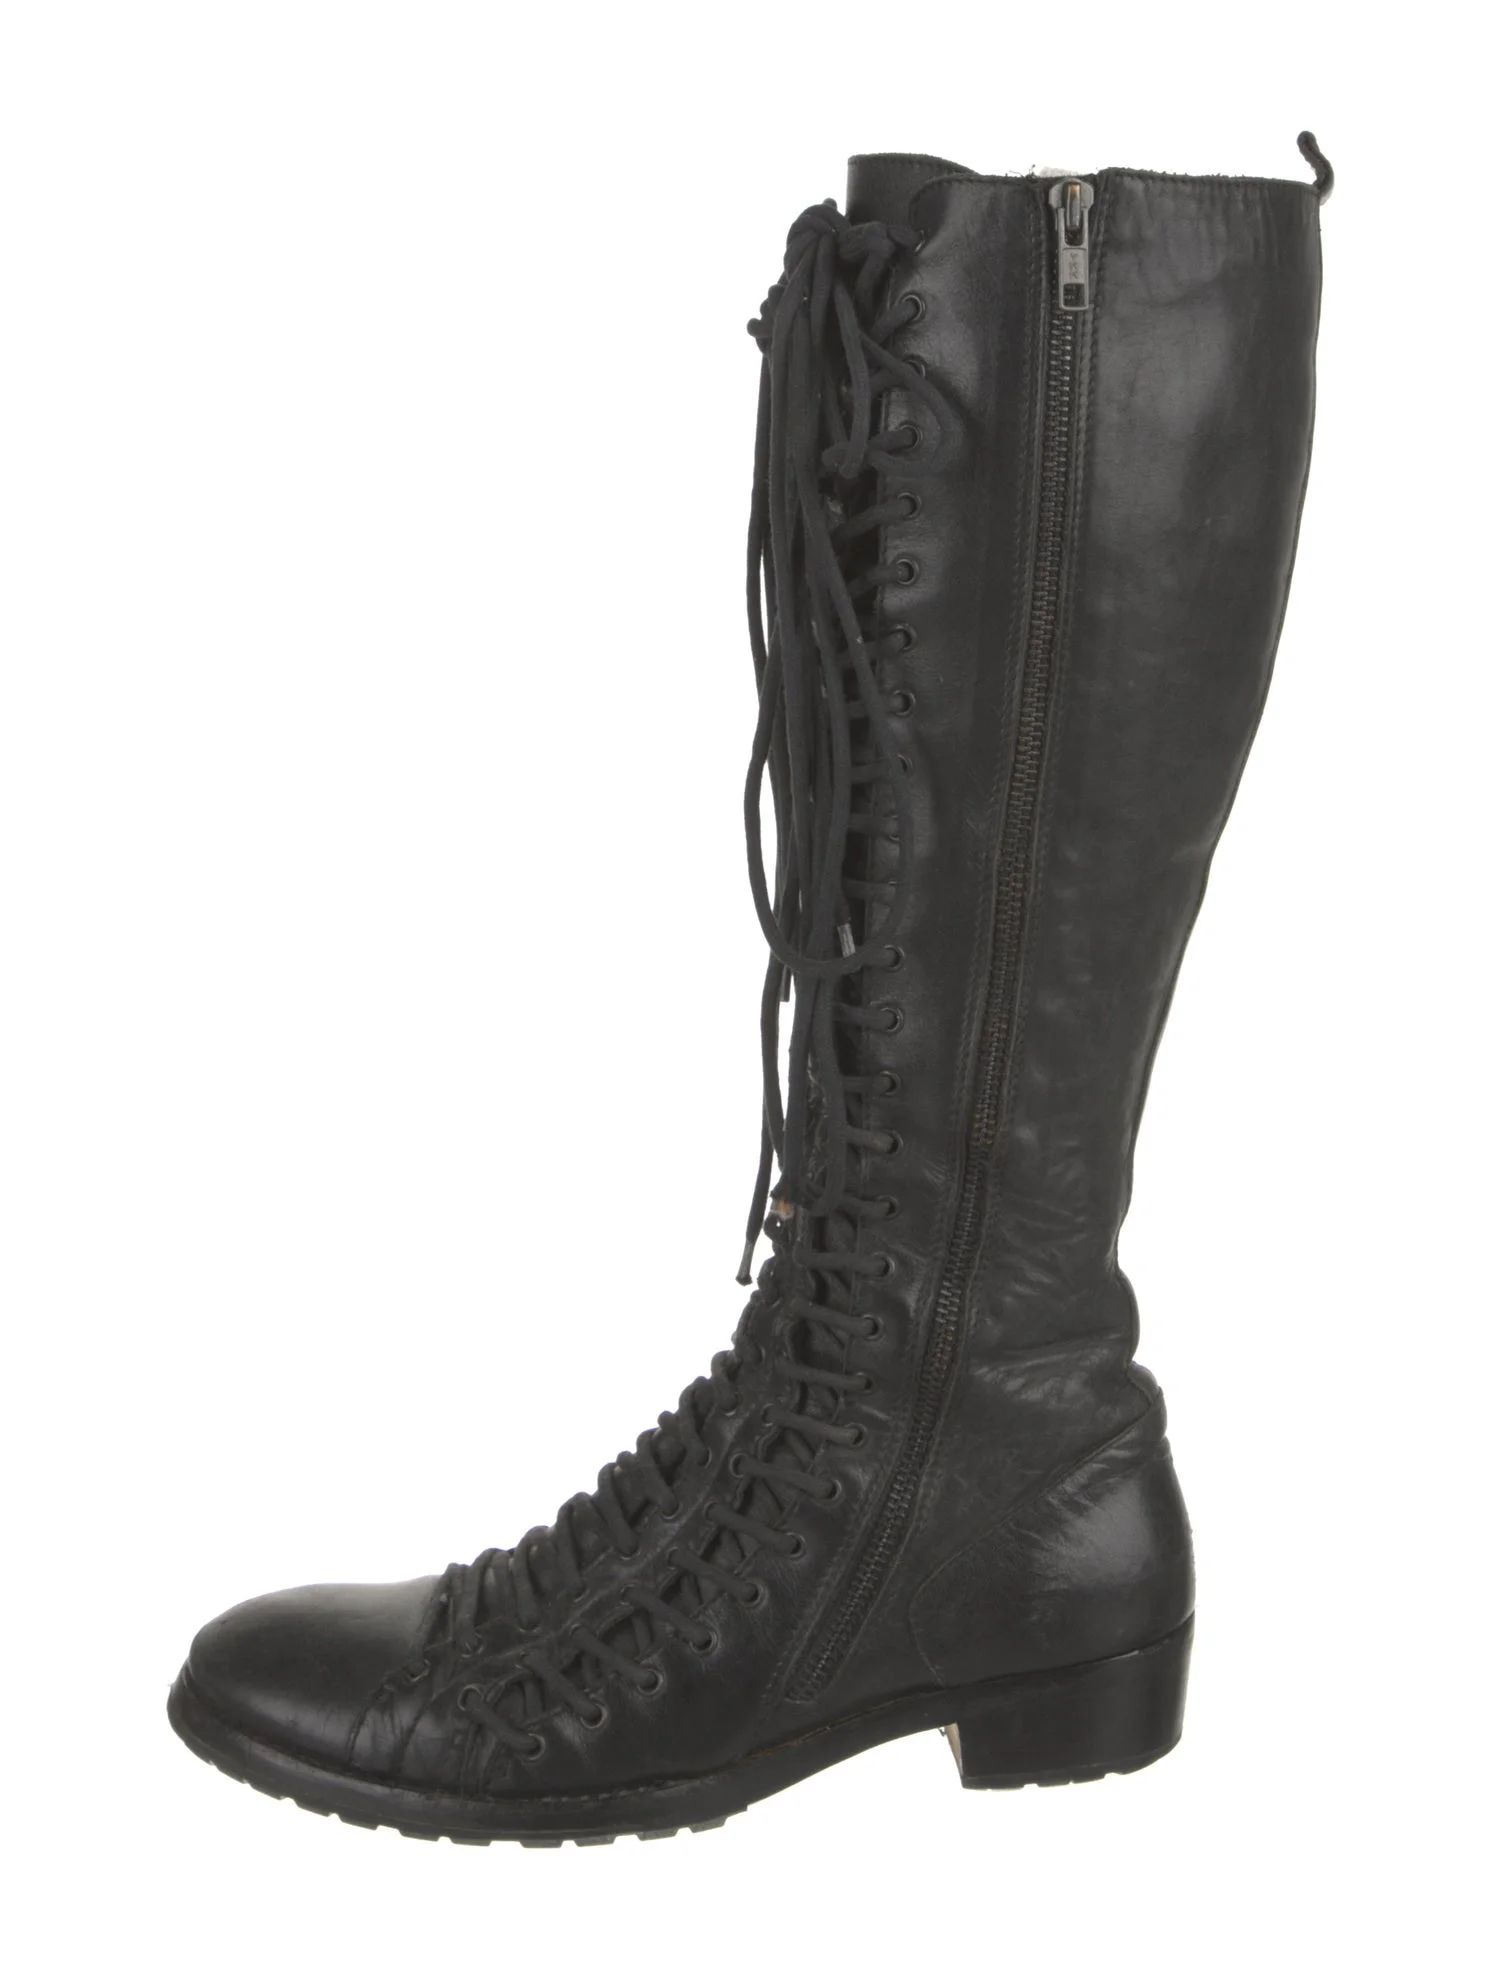 Ann Demeulemeester Vintage Knee-High Combat Boots | The RealReal